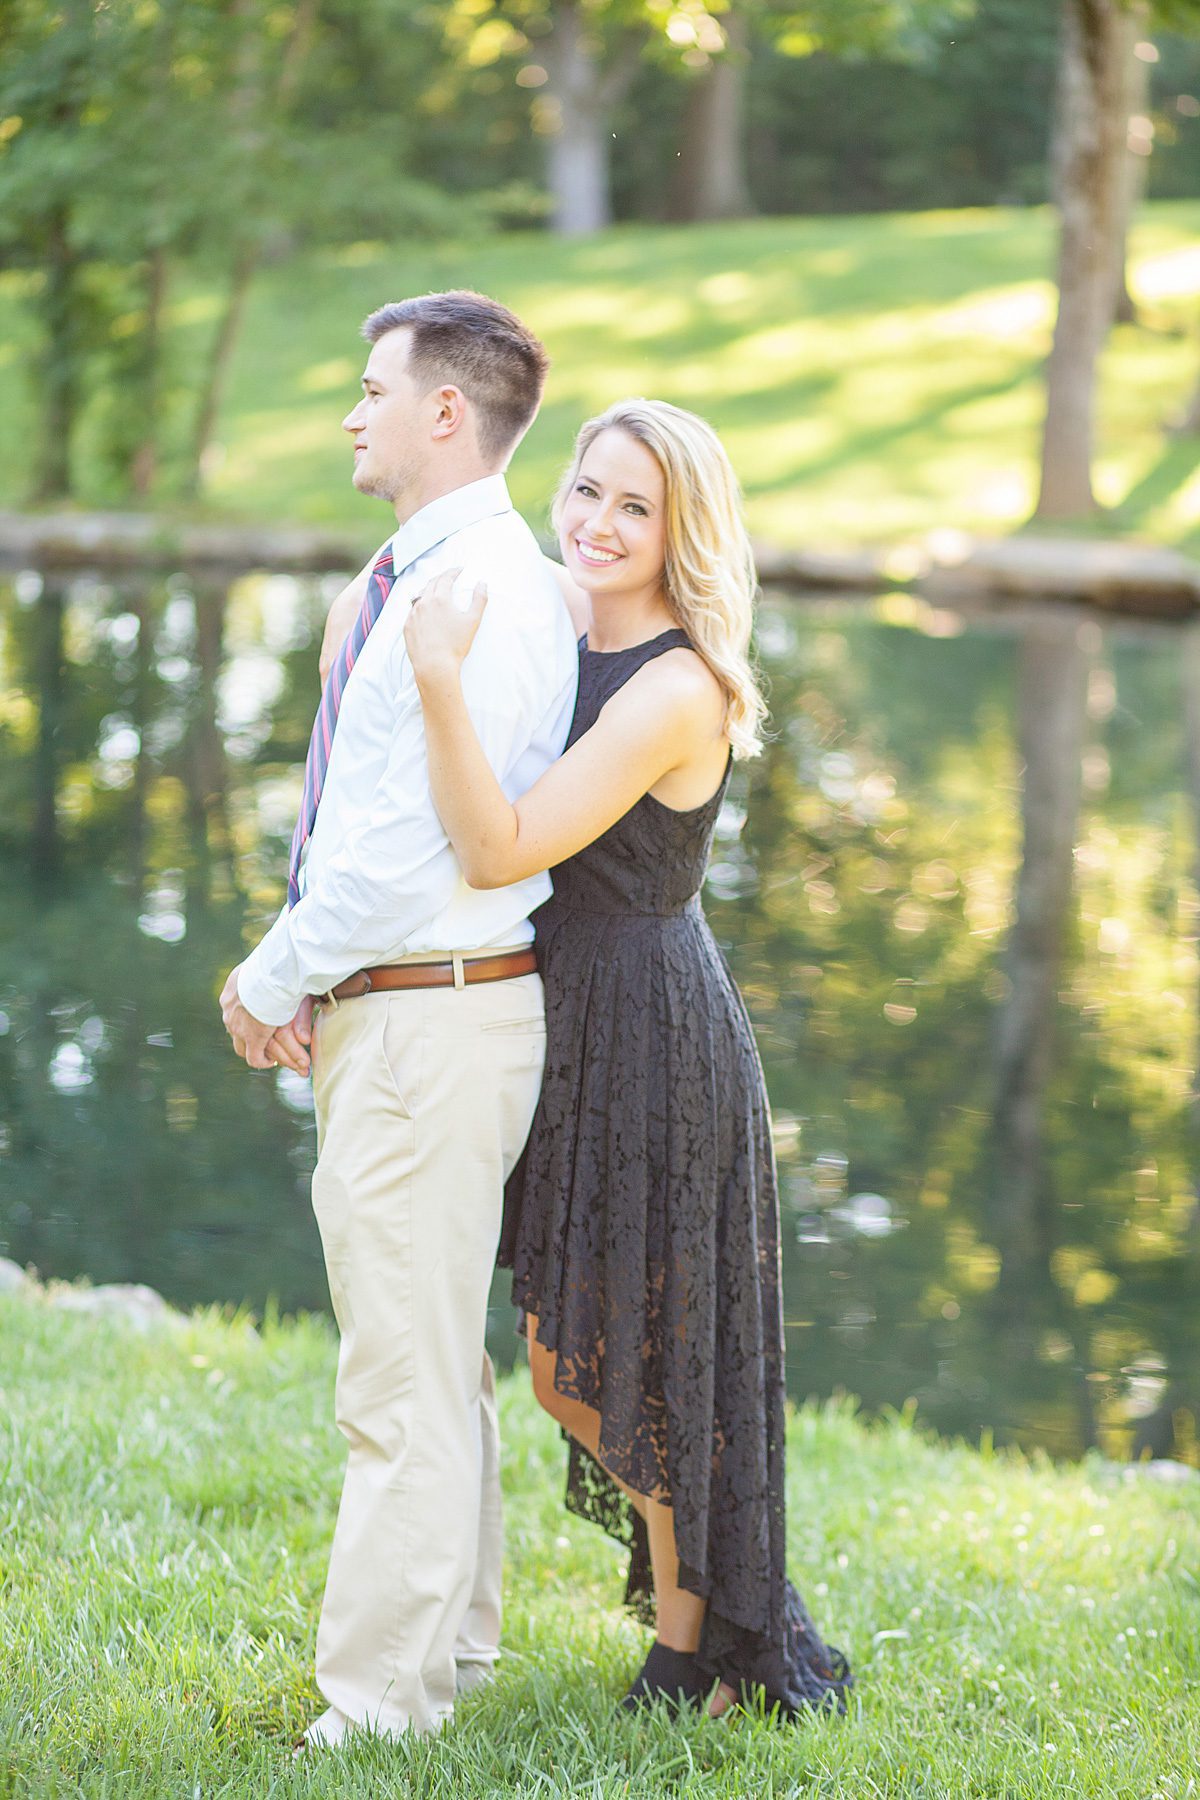 courtney engagement photo session at Cheekwood Gardens in Nashville TN photo by krista lee